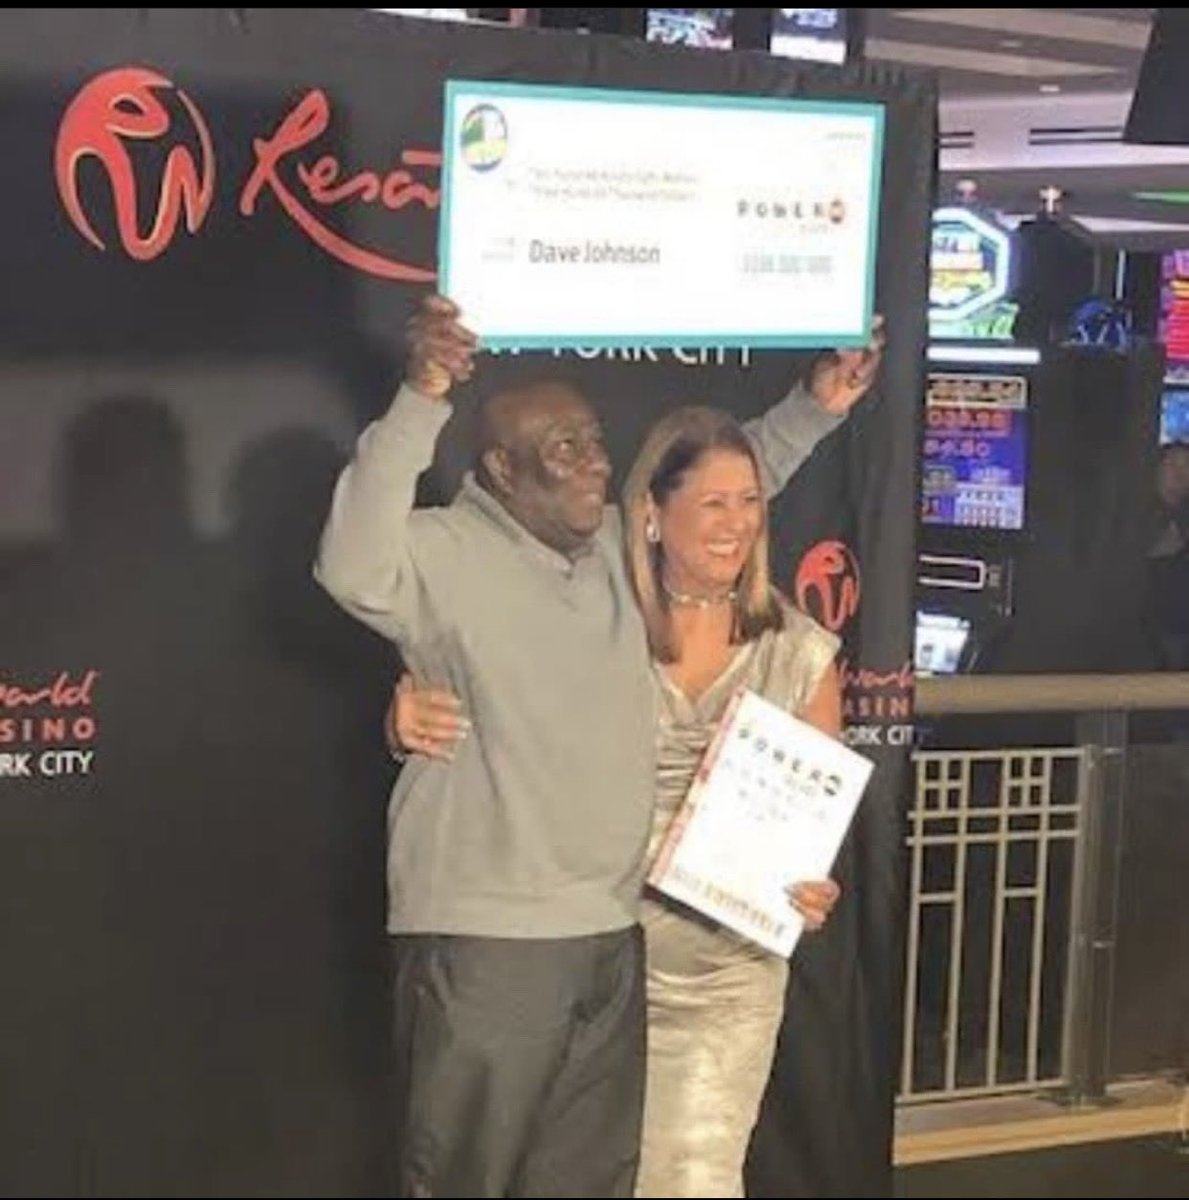 Hello this is Dave Johnson powerball winner, Congratulations you have been randomly picked among those I will be giving $30,000 are you ready to get your winnings congratulations in advance !!